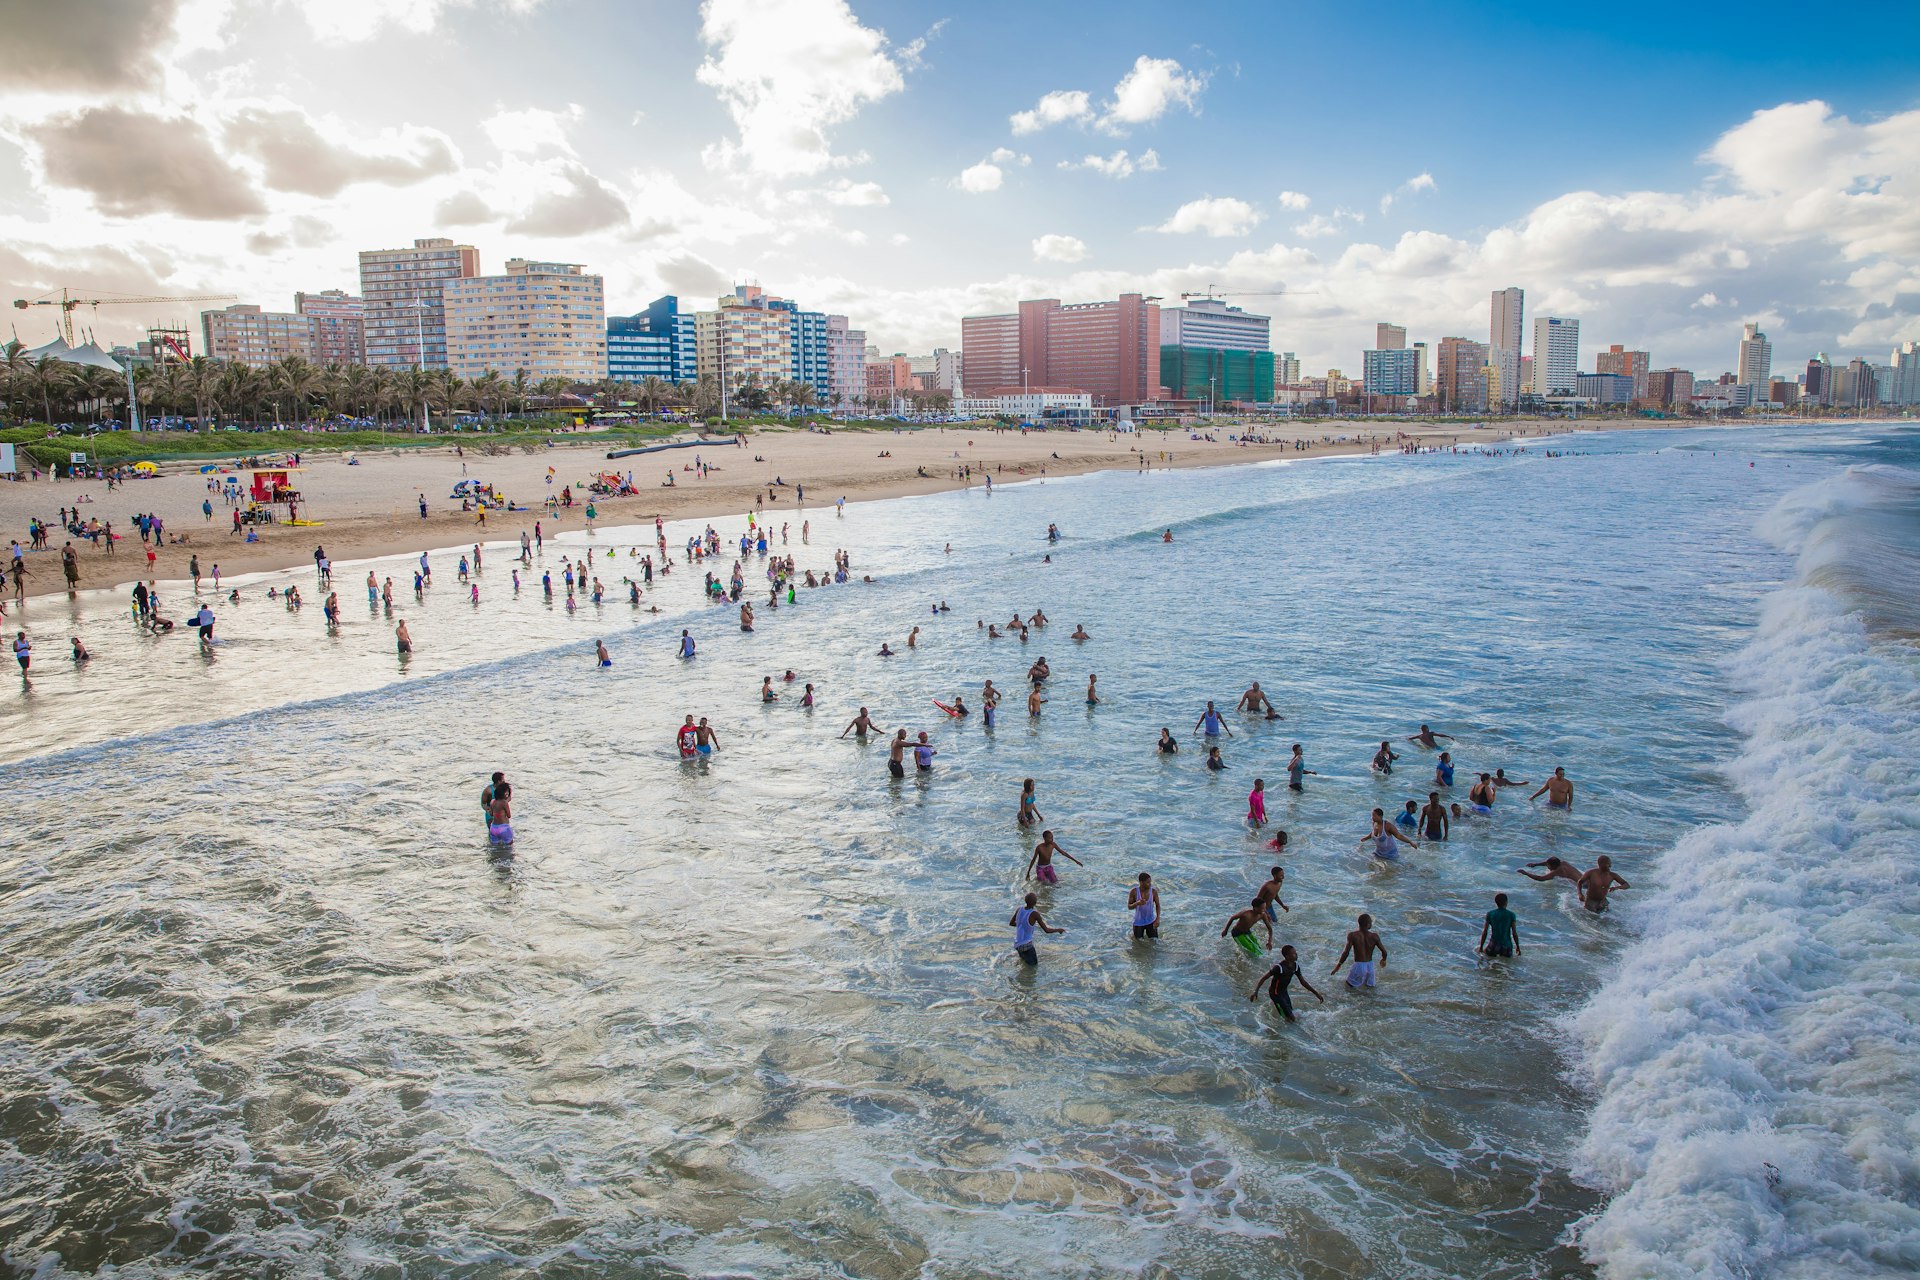 People enjoying the beach in Durban, South Africa